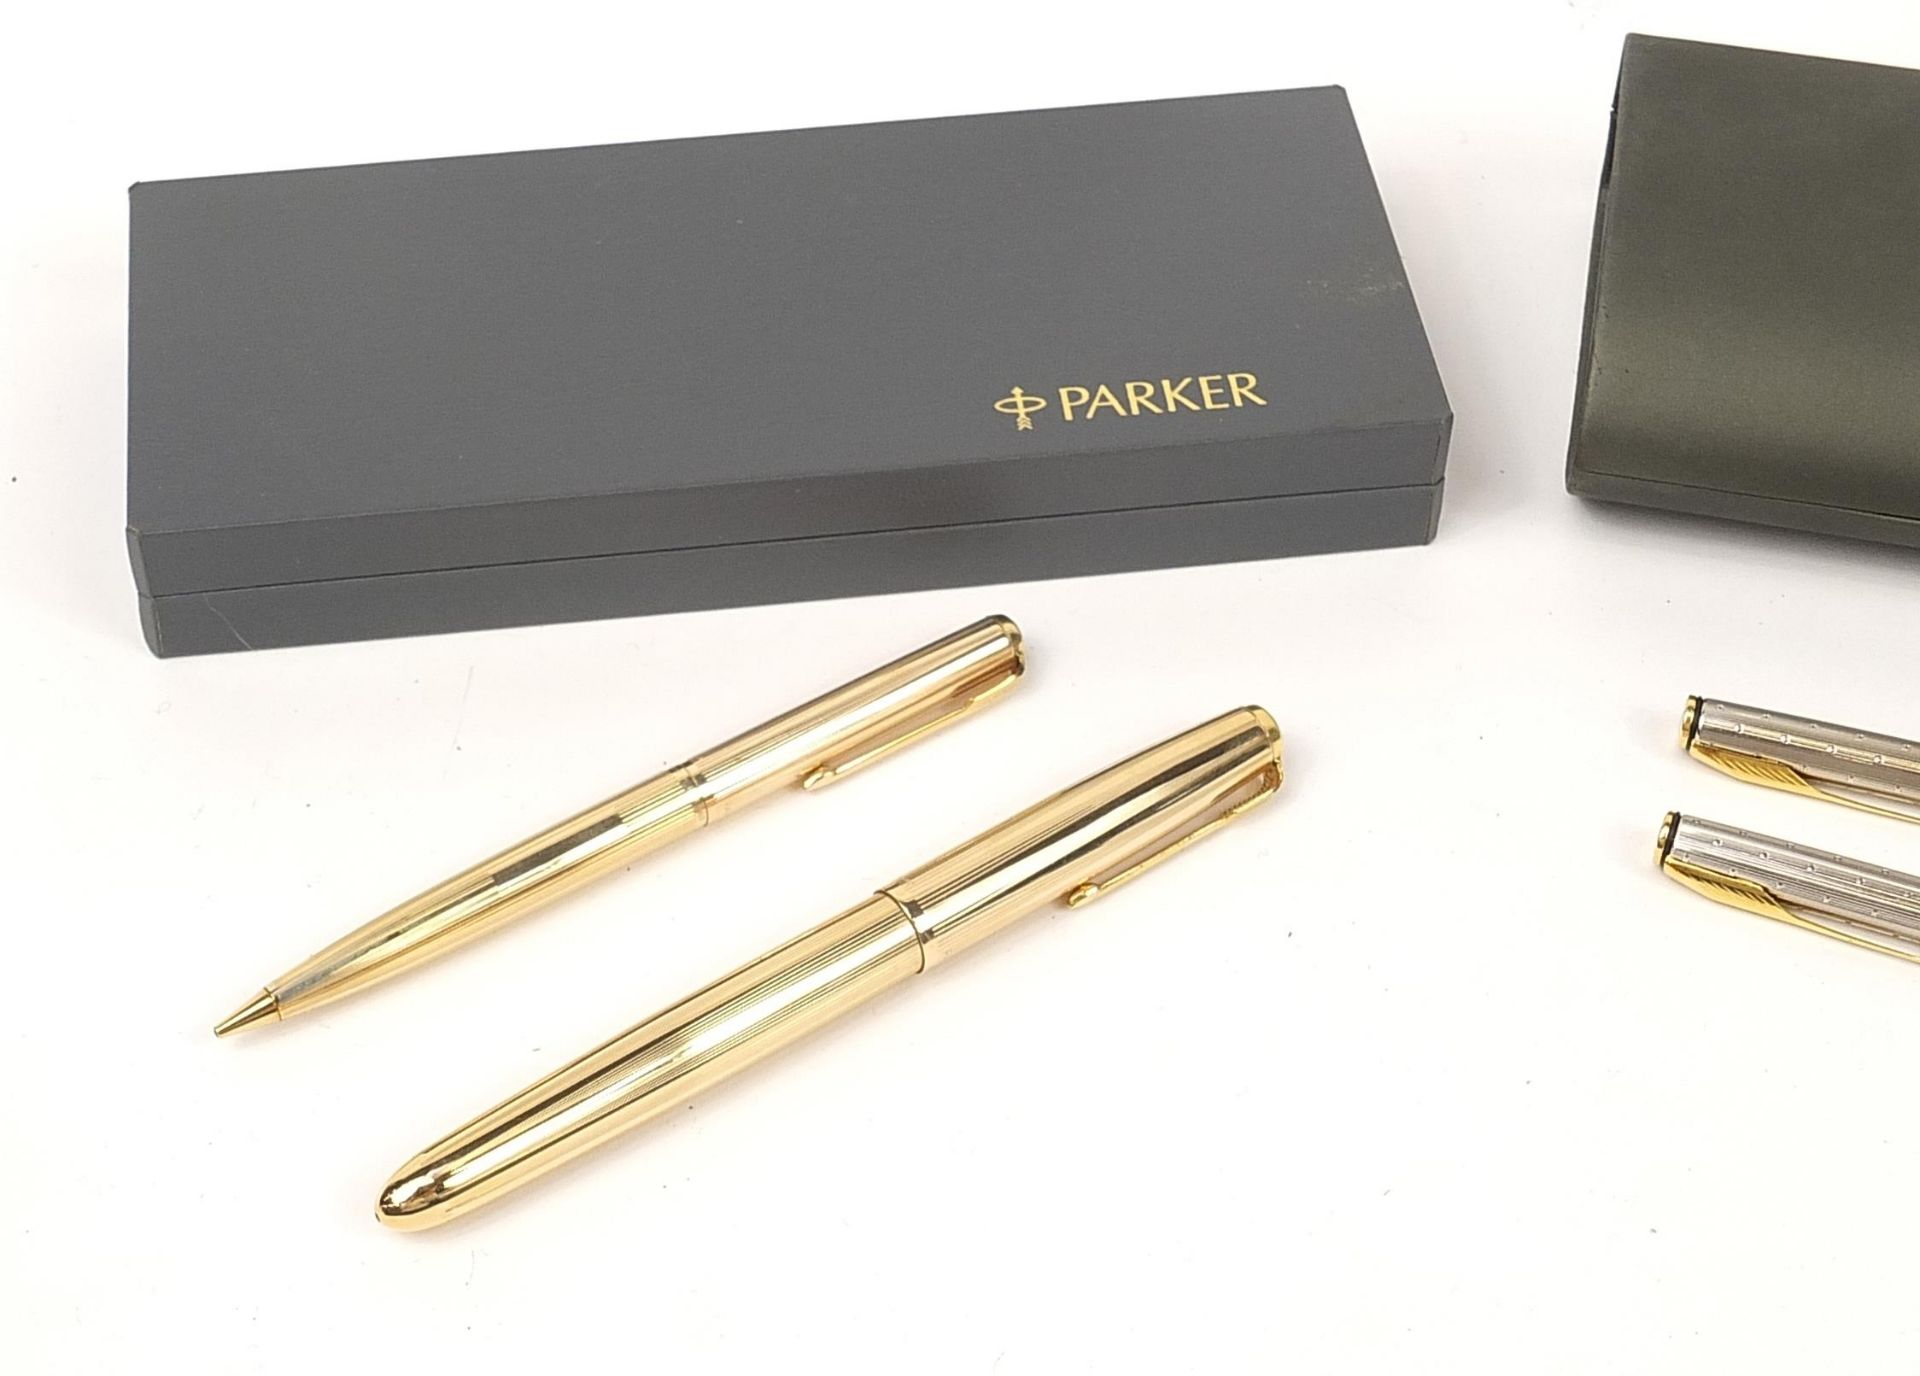 Fountain pens including Watermans Ideal, Parker Insignia and rolled gold Parker 51 fountain pen - Image 2 of 3